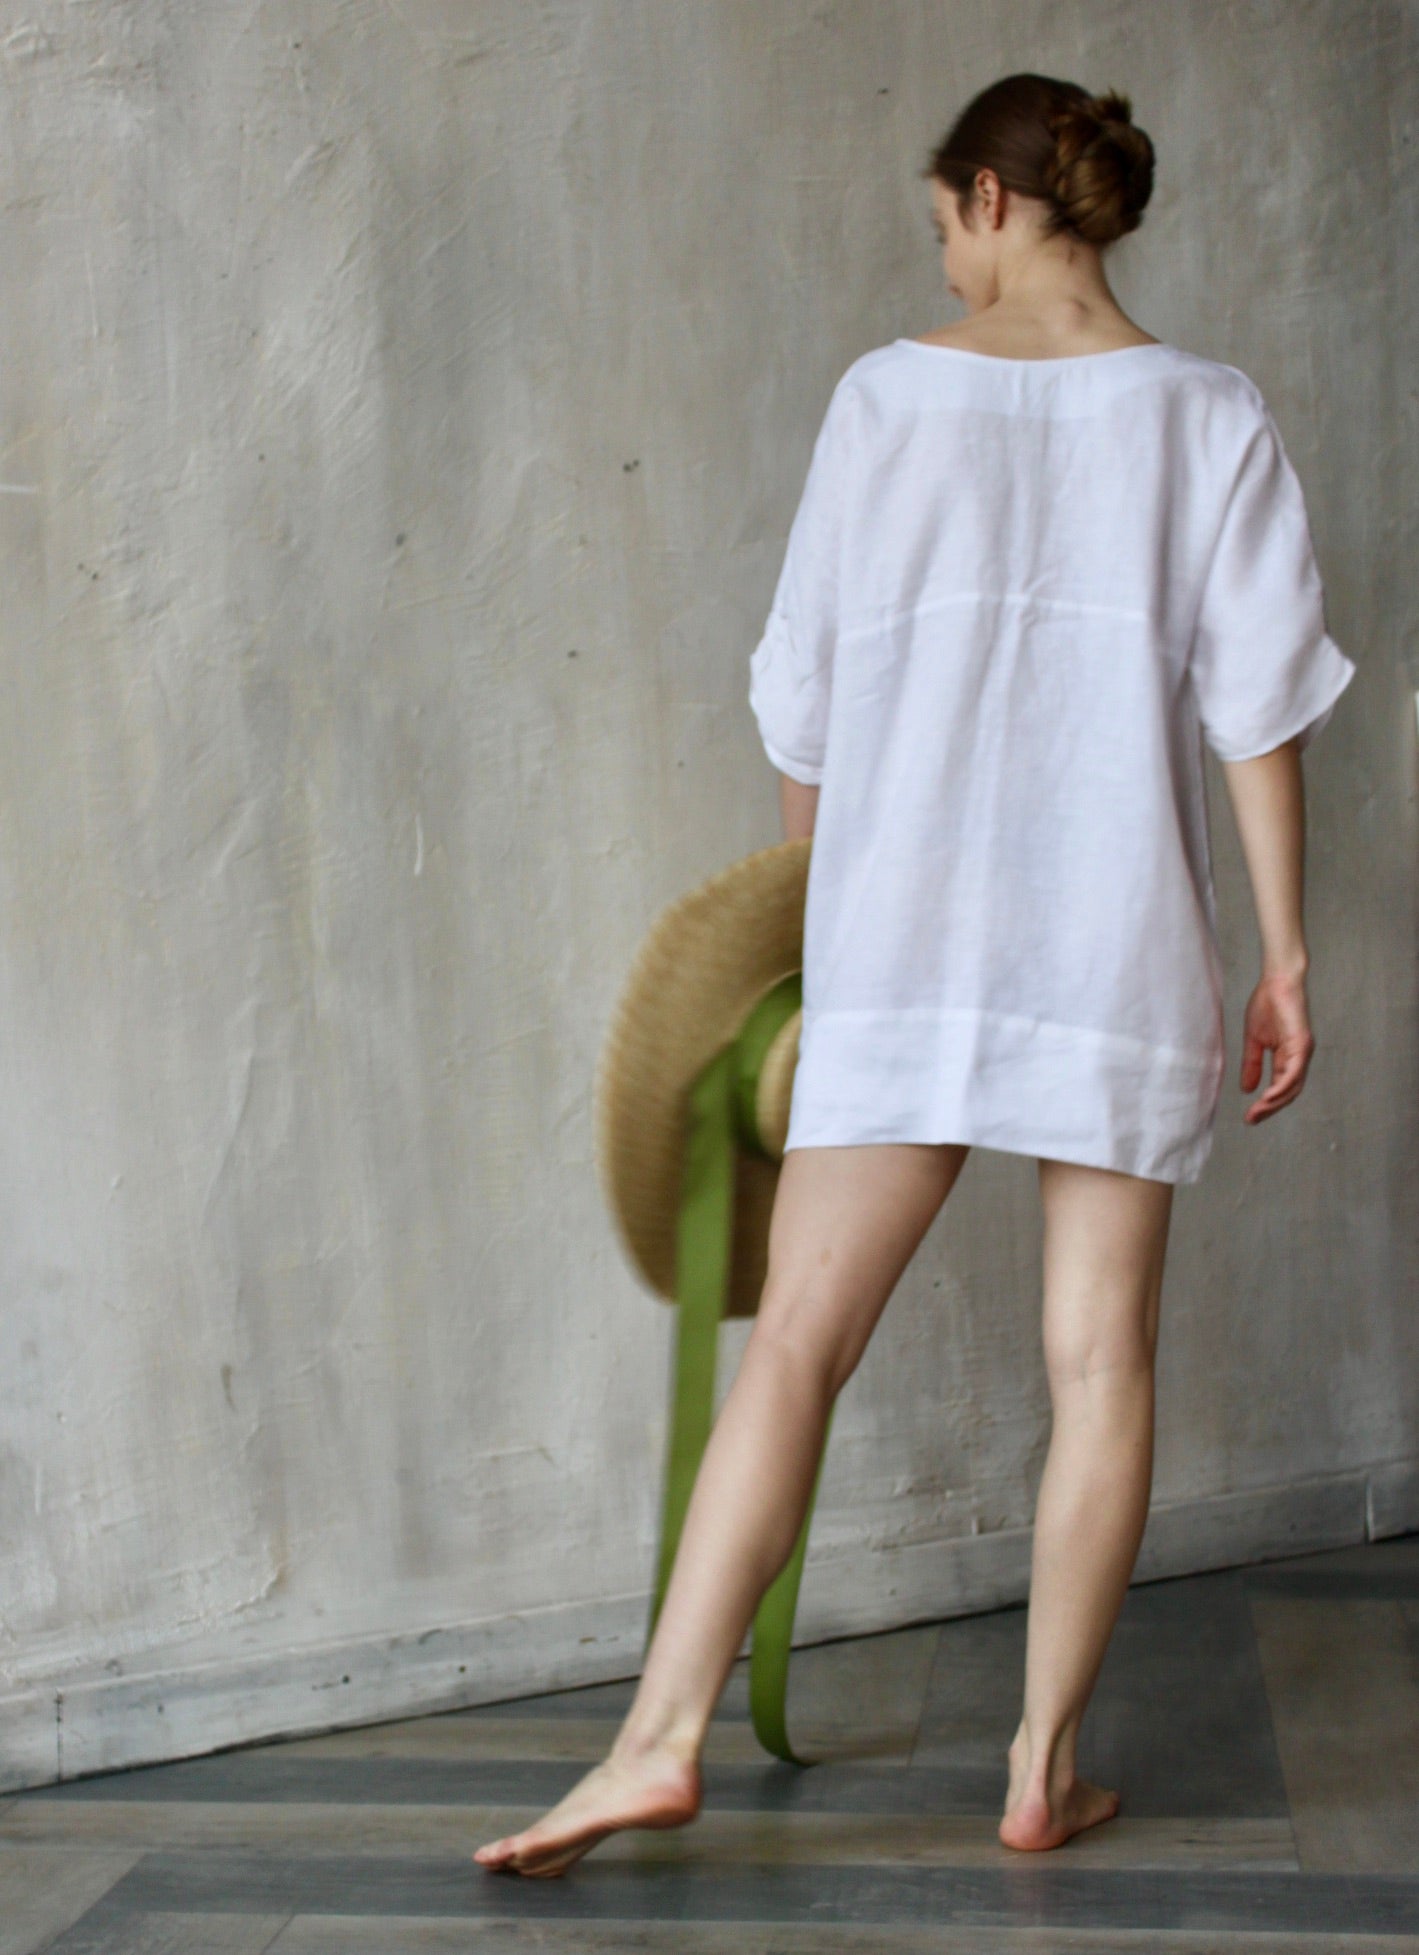 Beach Linen Tunic Dress - White, Black and other colors